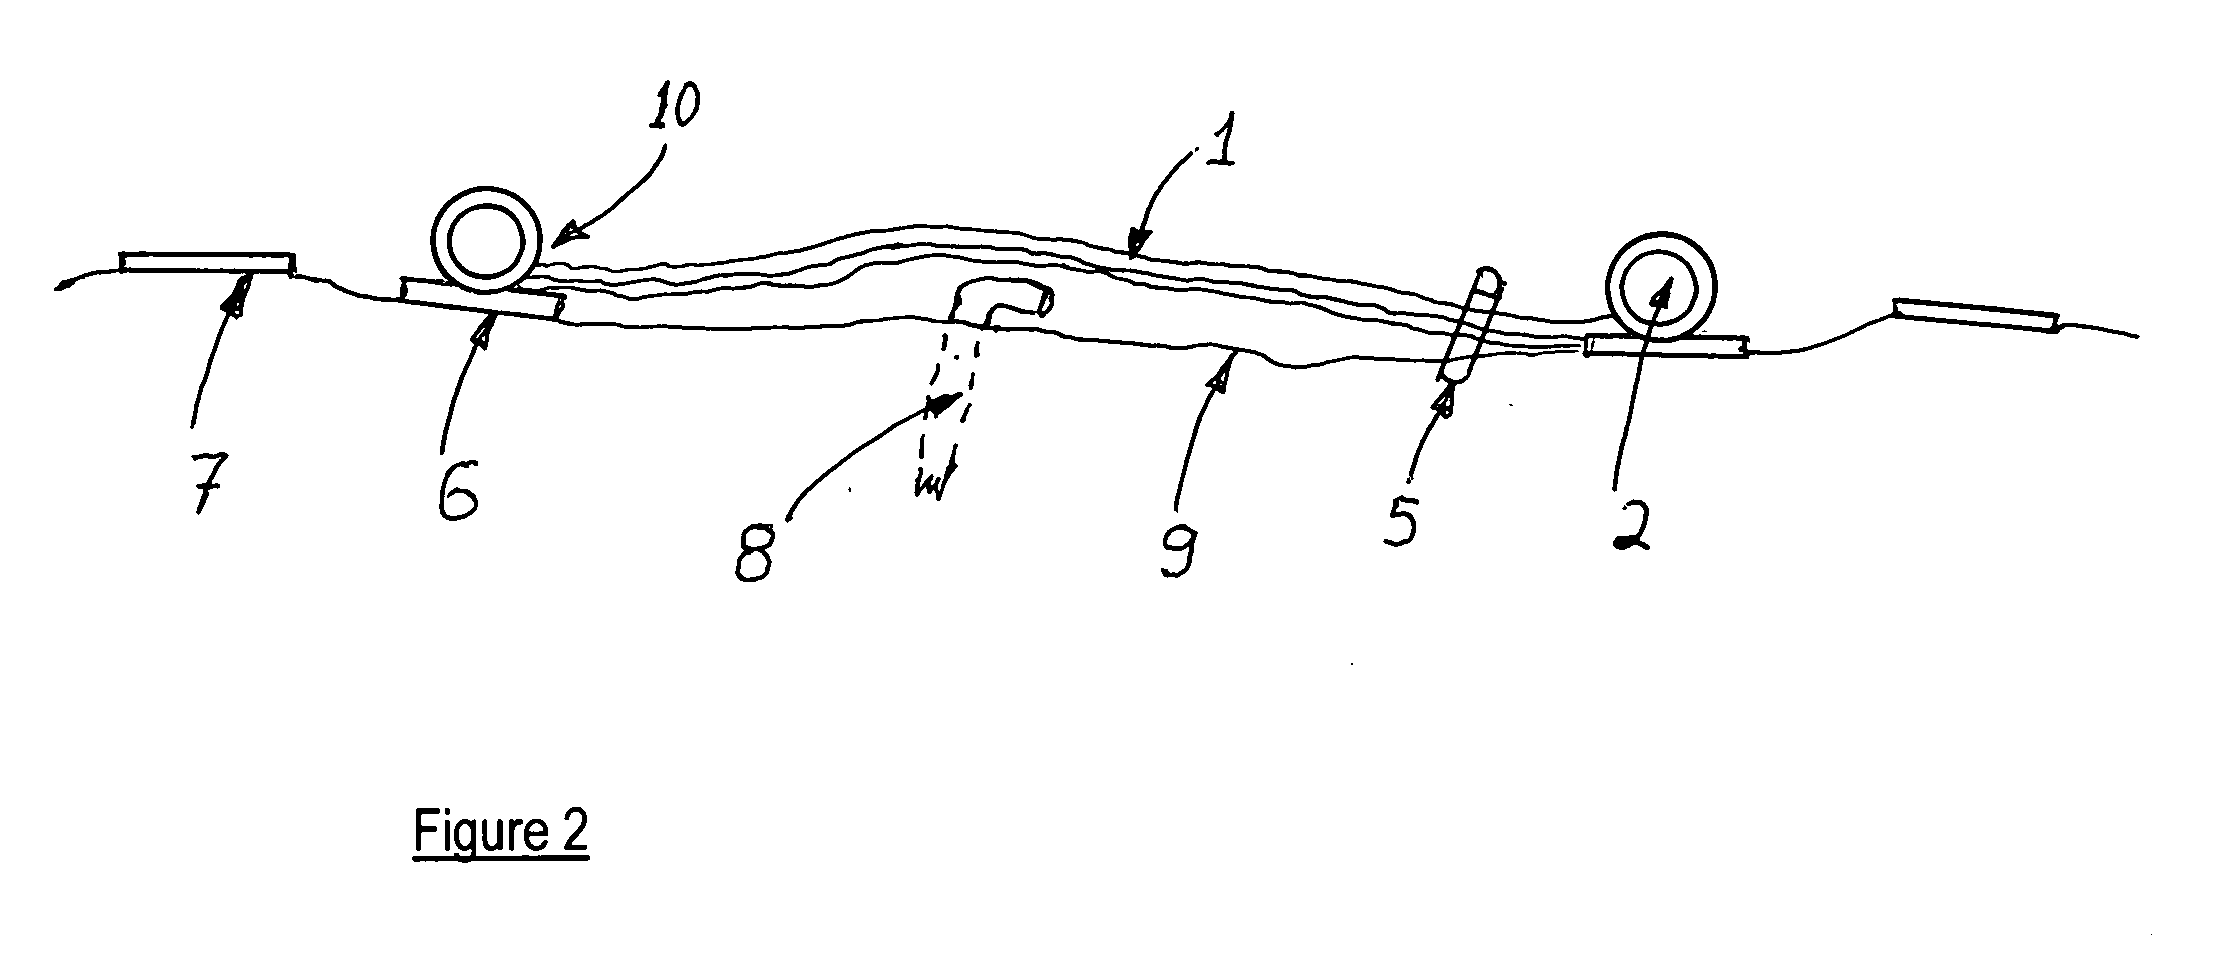 Process and Apparatus for Sealing Wellhead Leaks Underwater or On Land